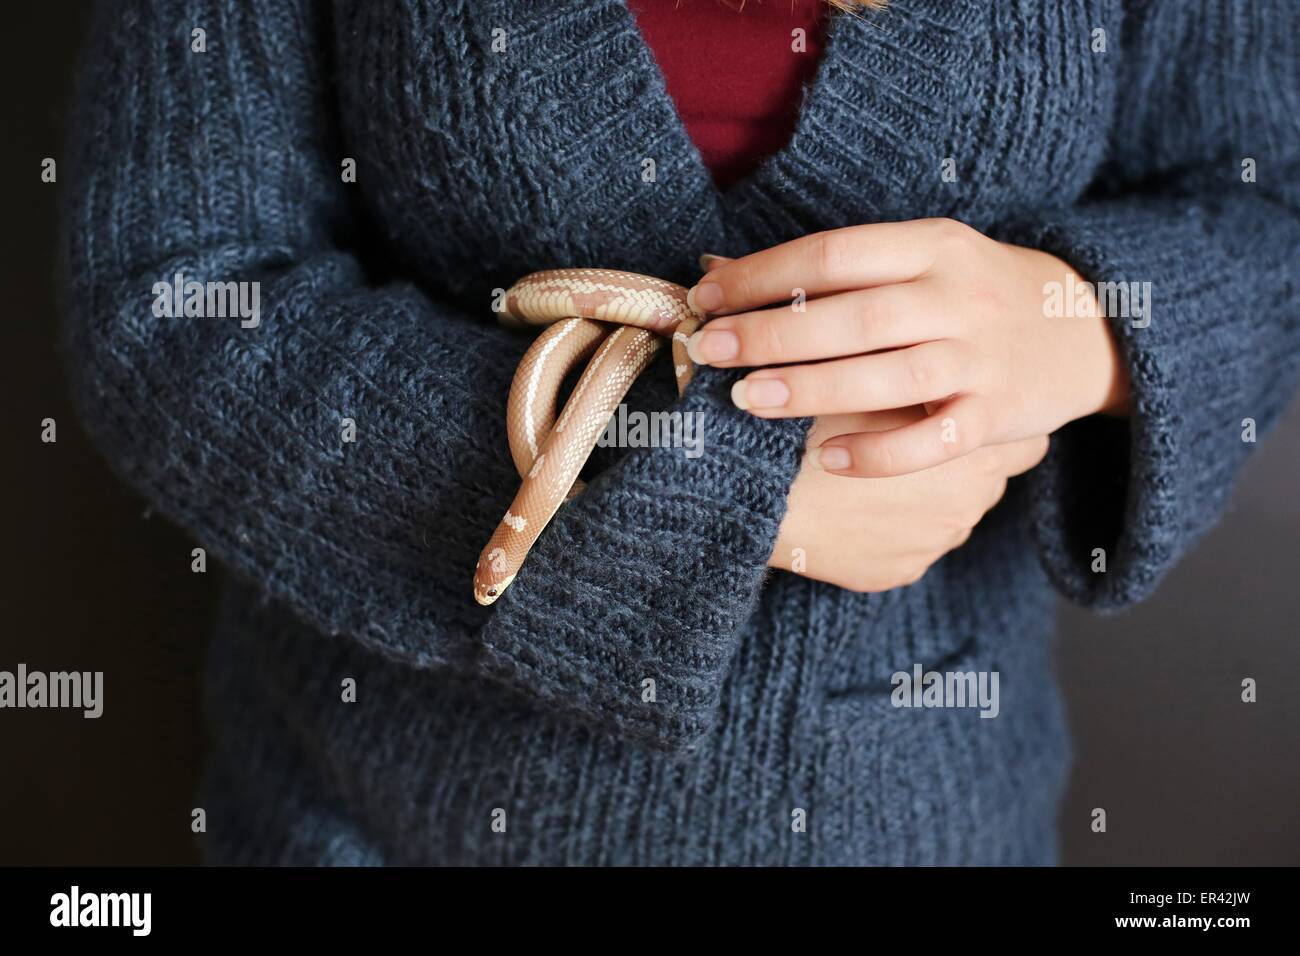 A close up of a snake being held by a teen girl. Stock Photo